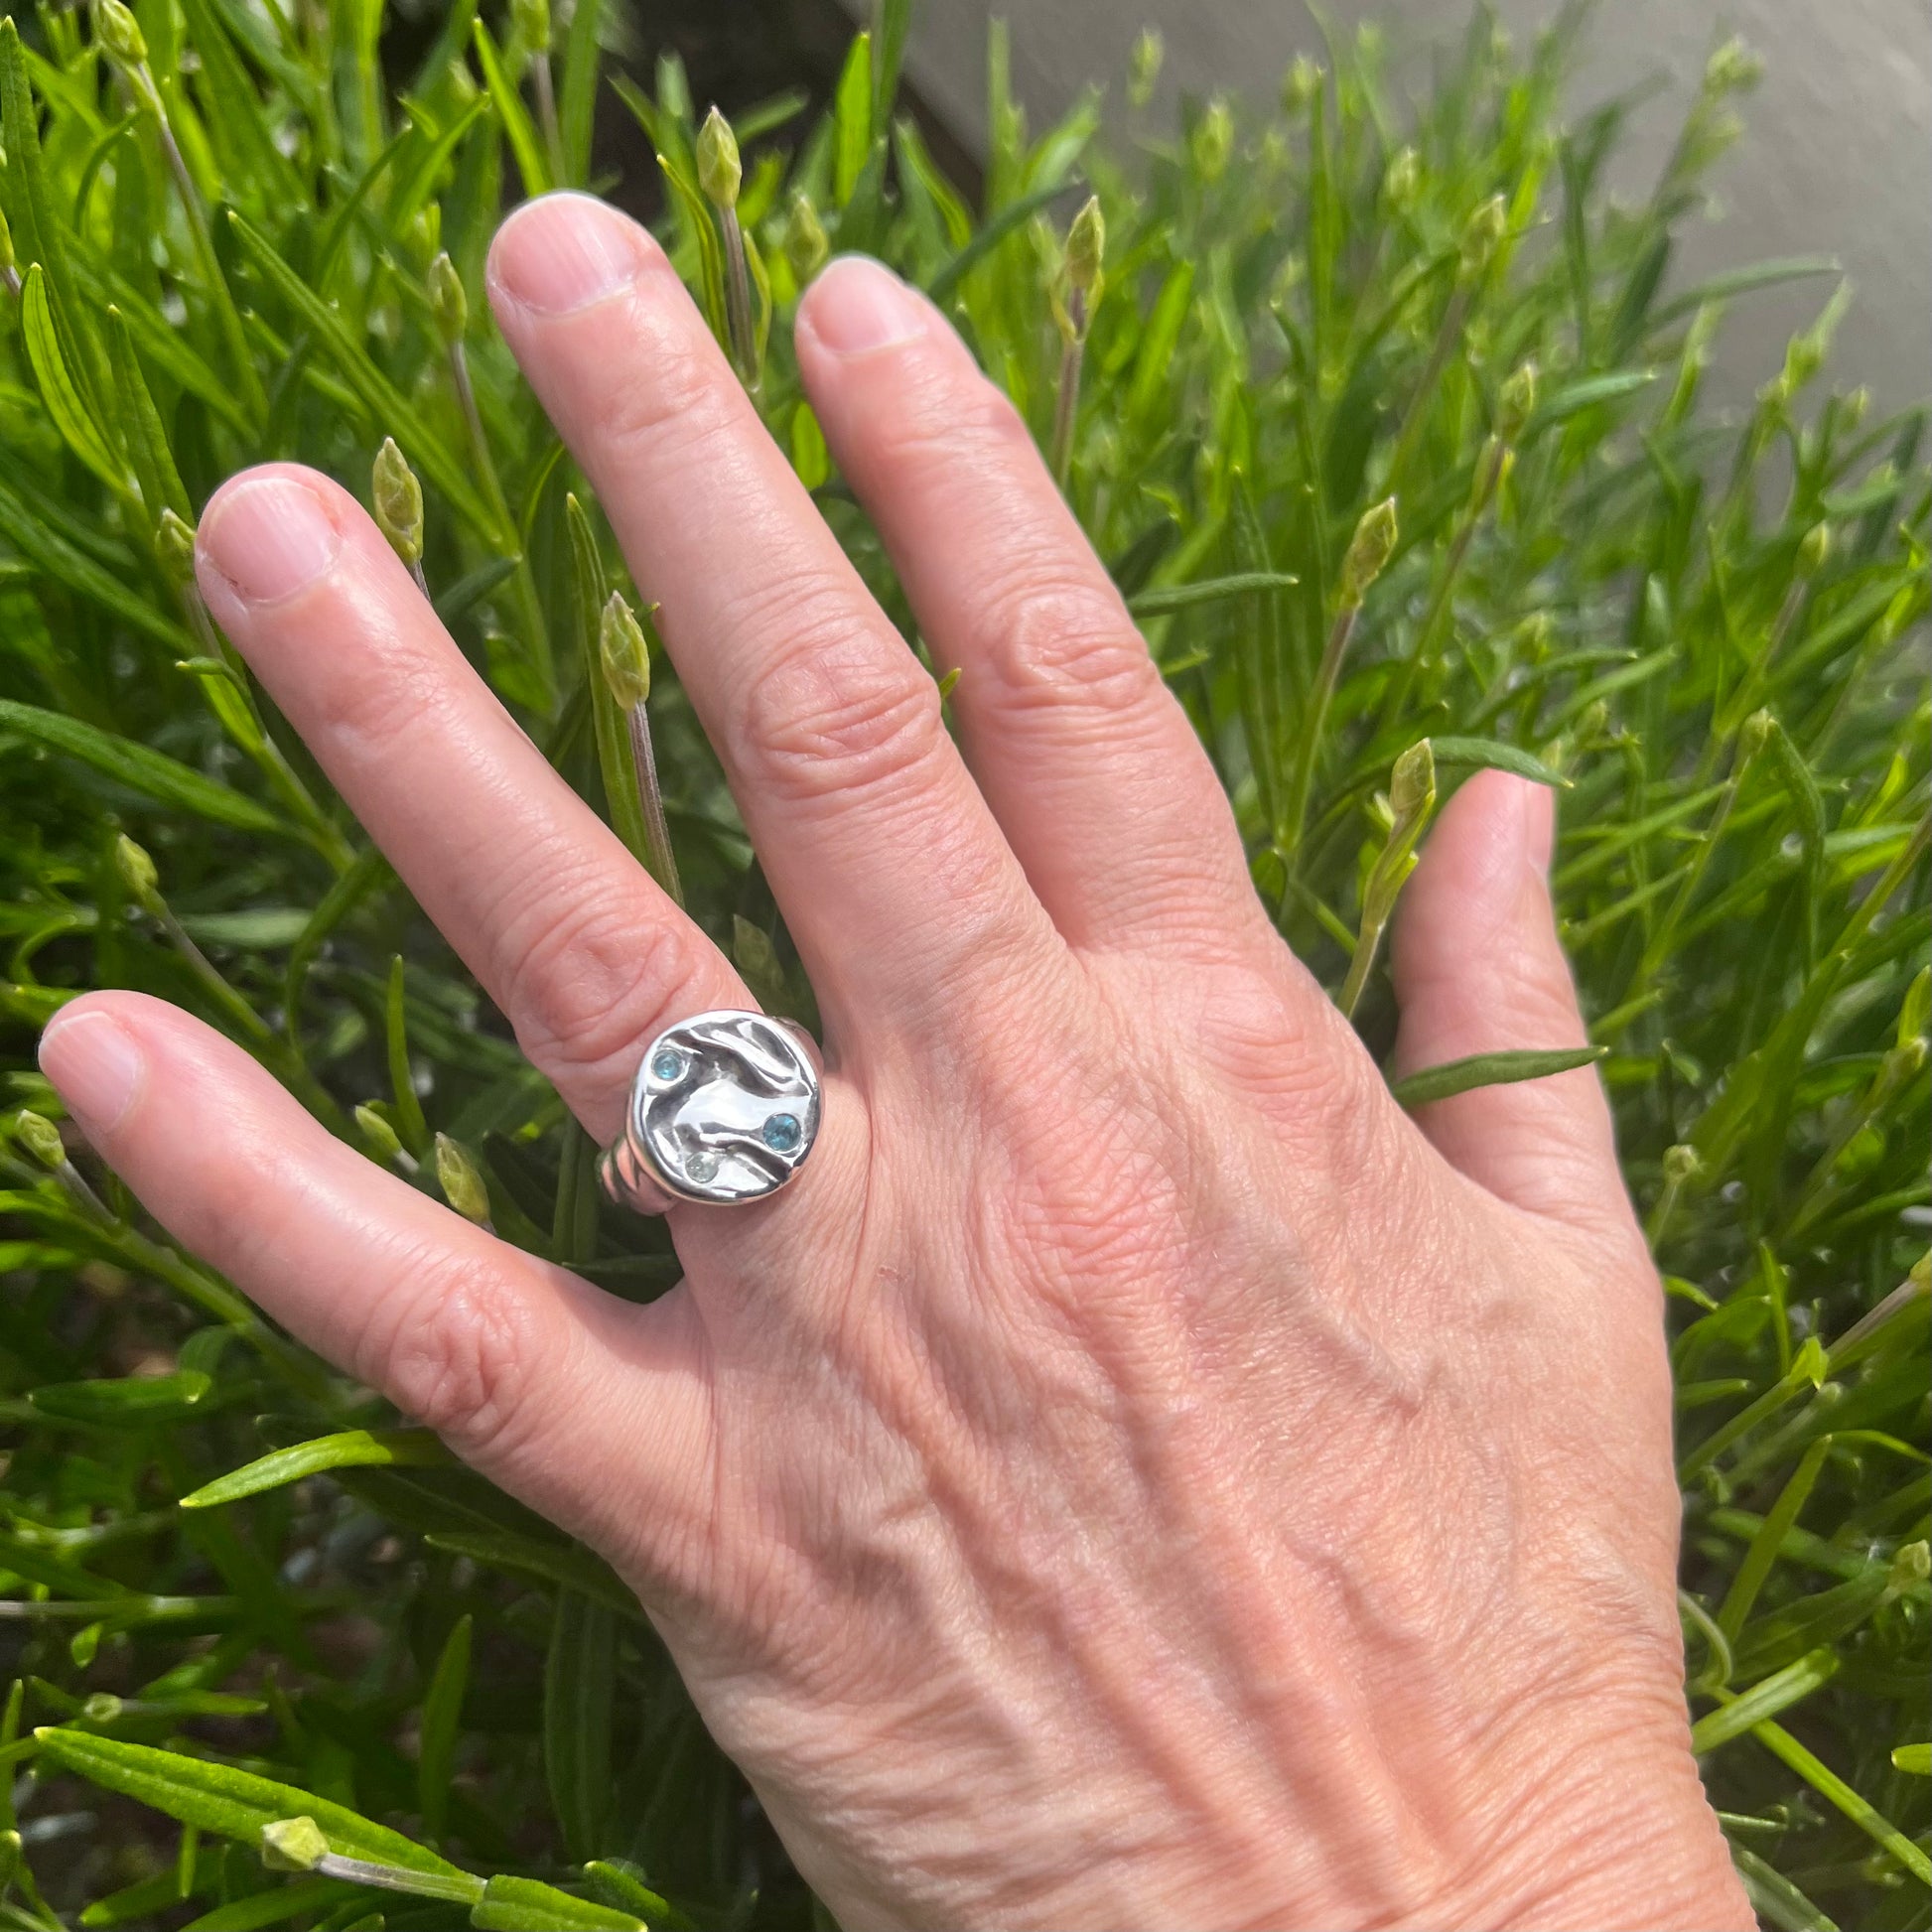 A triple topaz sterling silver splash ring on a hand with a shrub in the background.